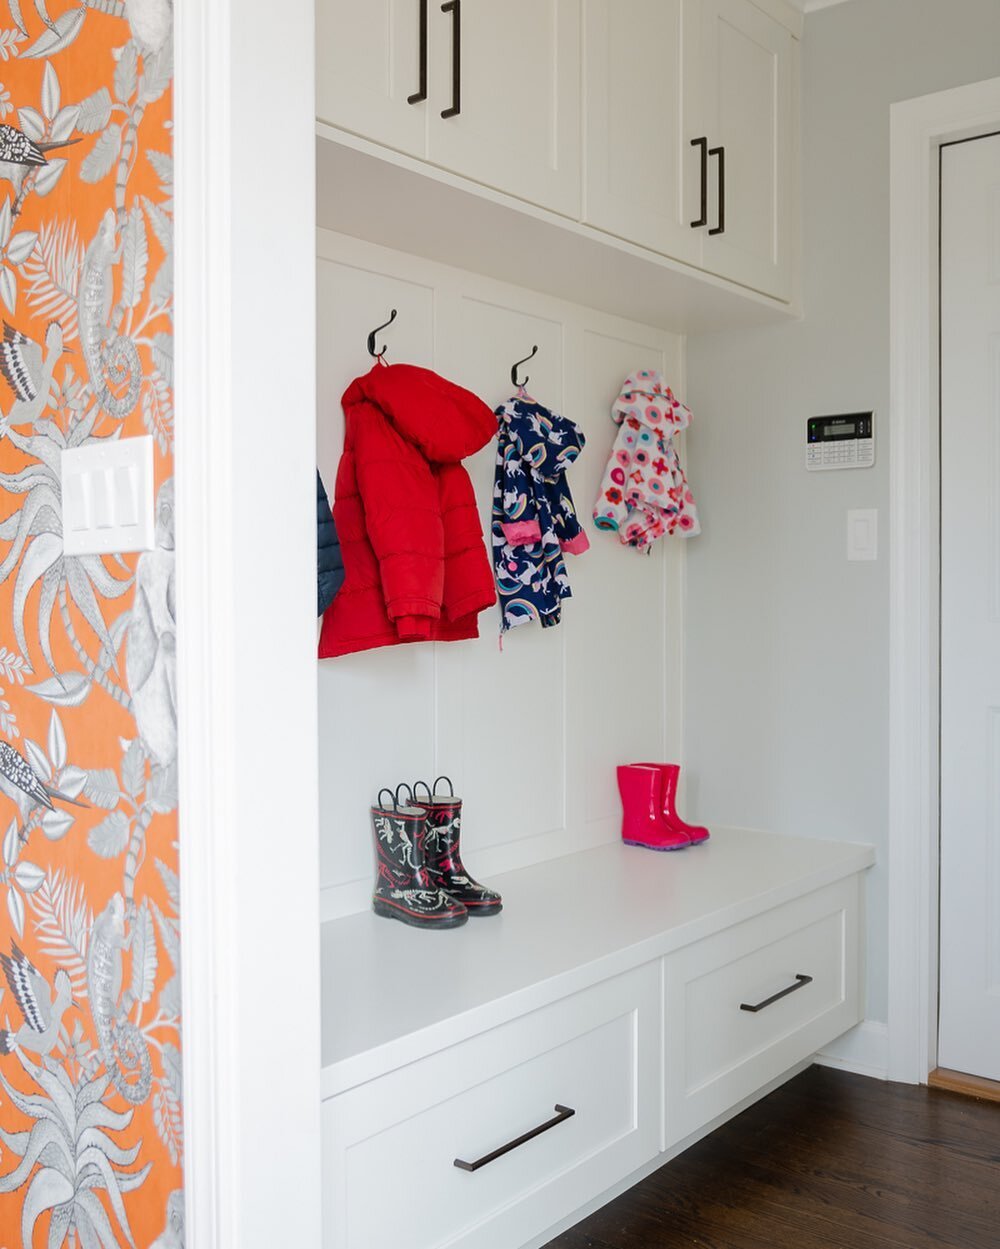 Back to school! Get the little ones organized with built in mudroom cabinetry. 

#mudroomcabinetry #kitchendesign #nukitchens